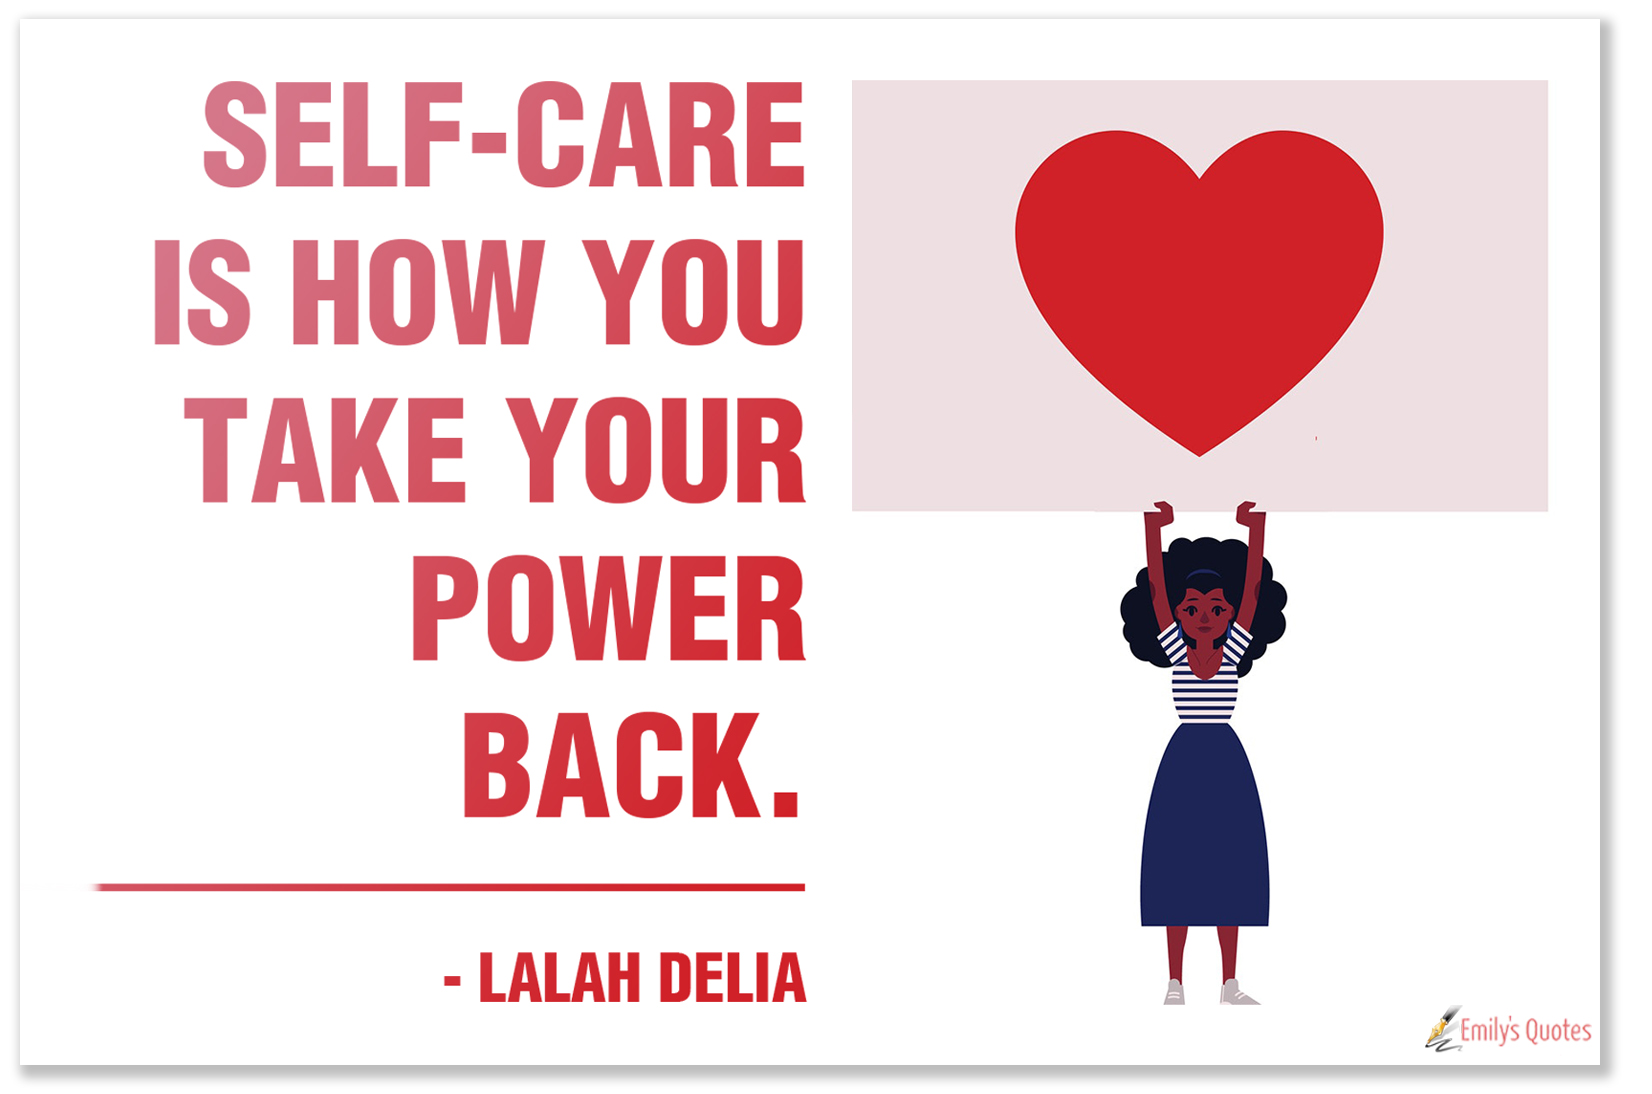 Self-care is how you take your power back